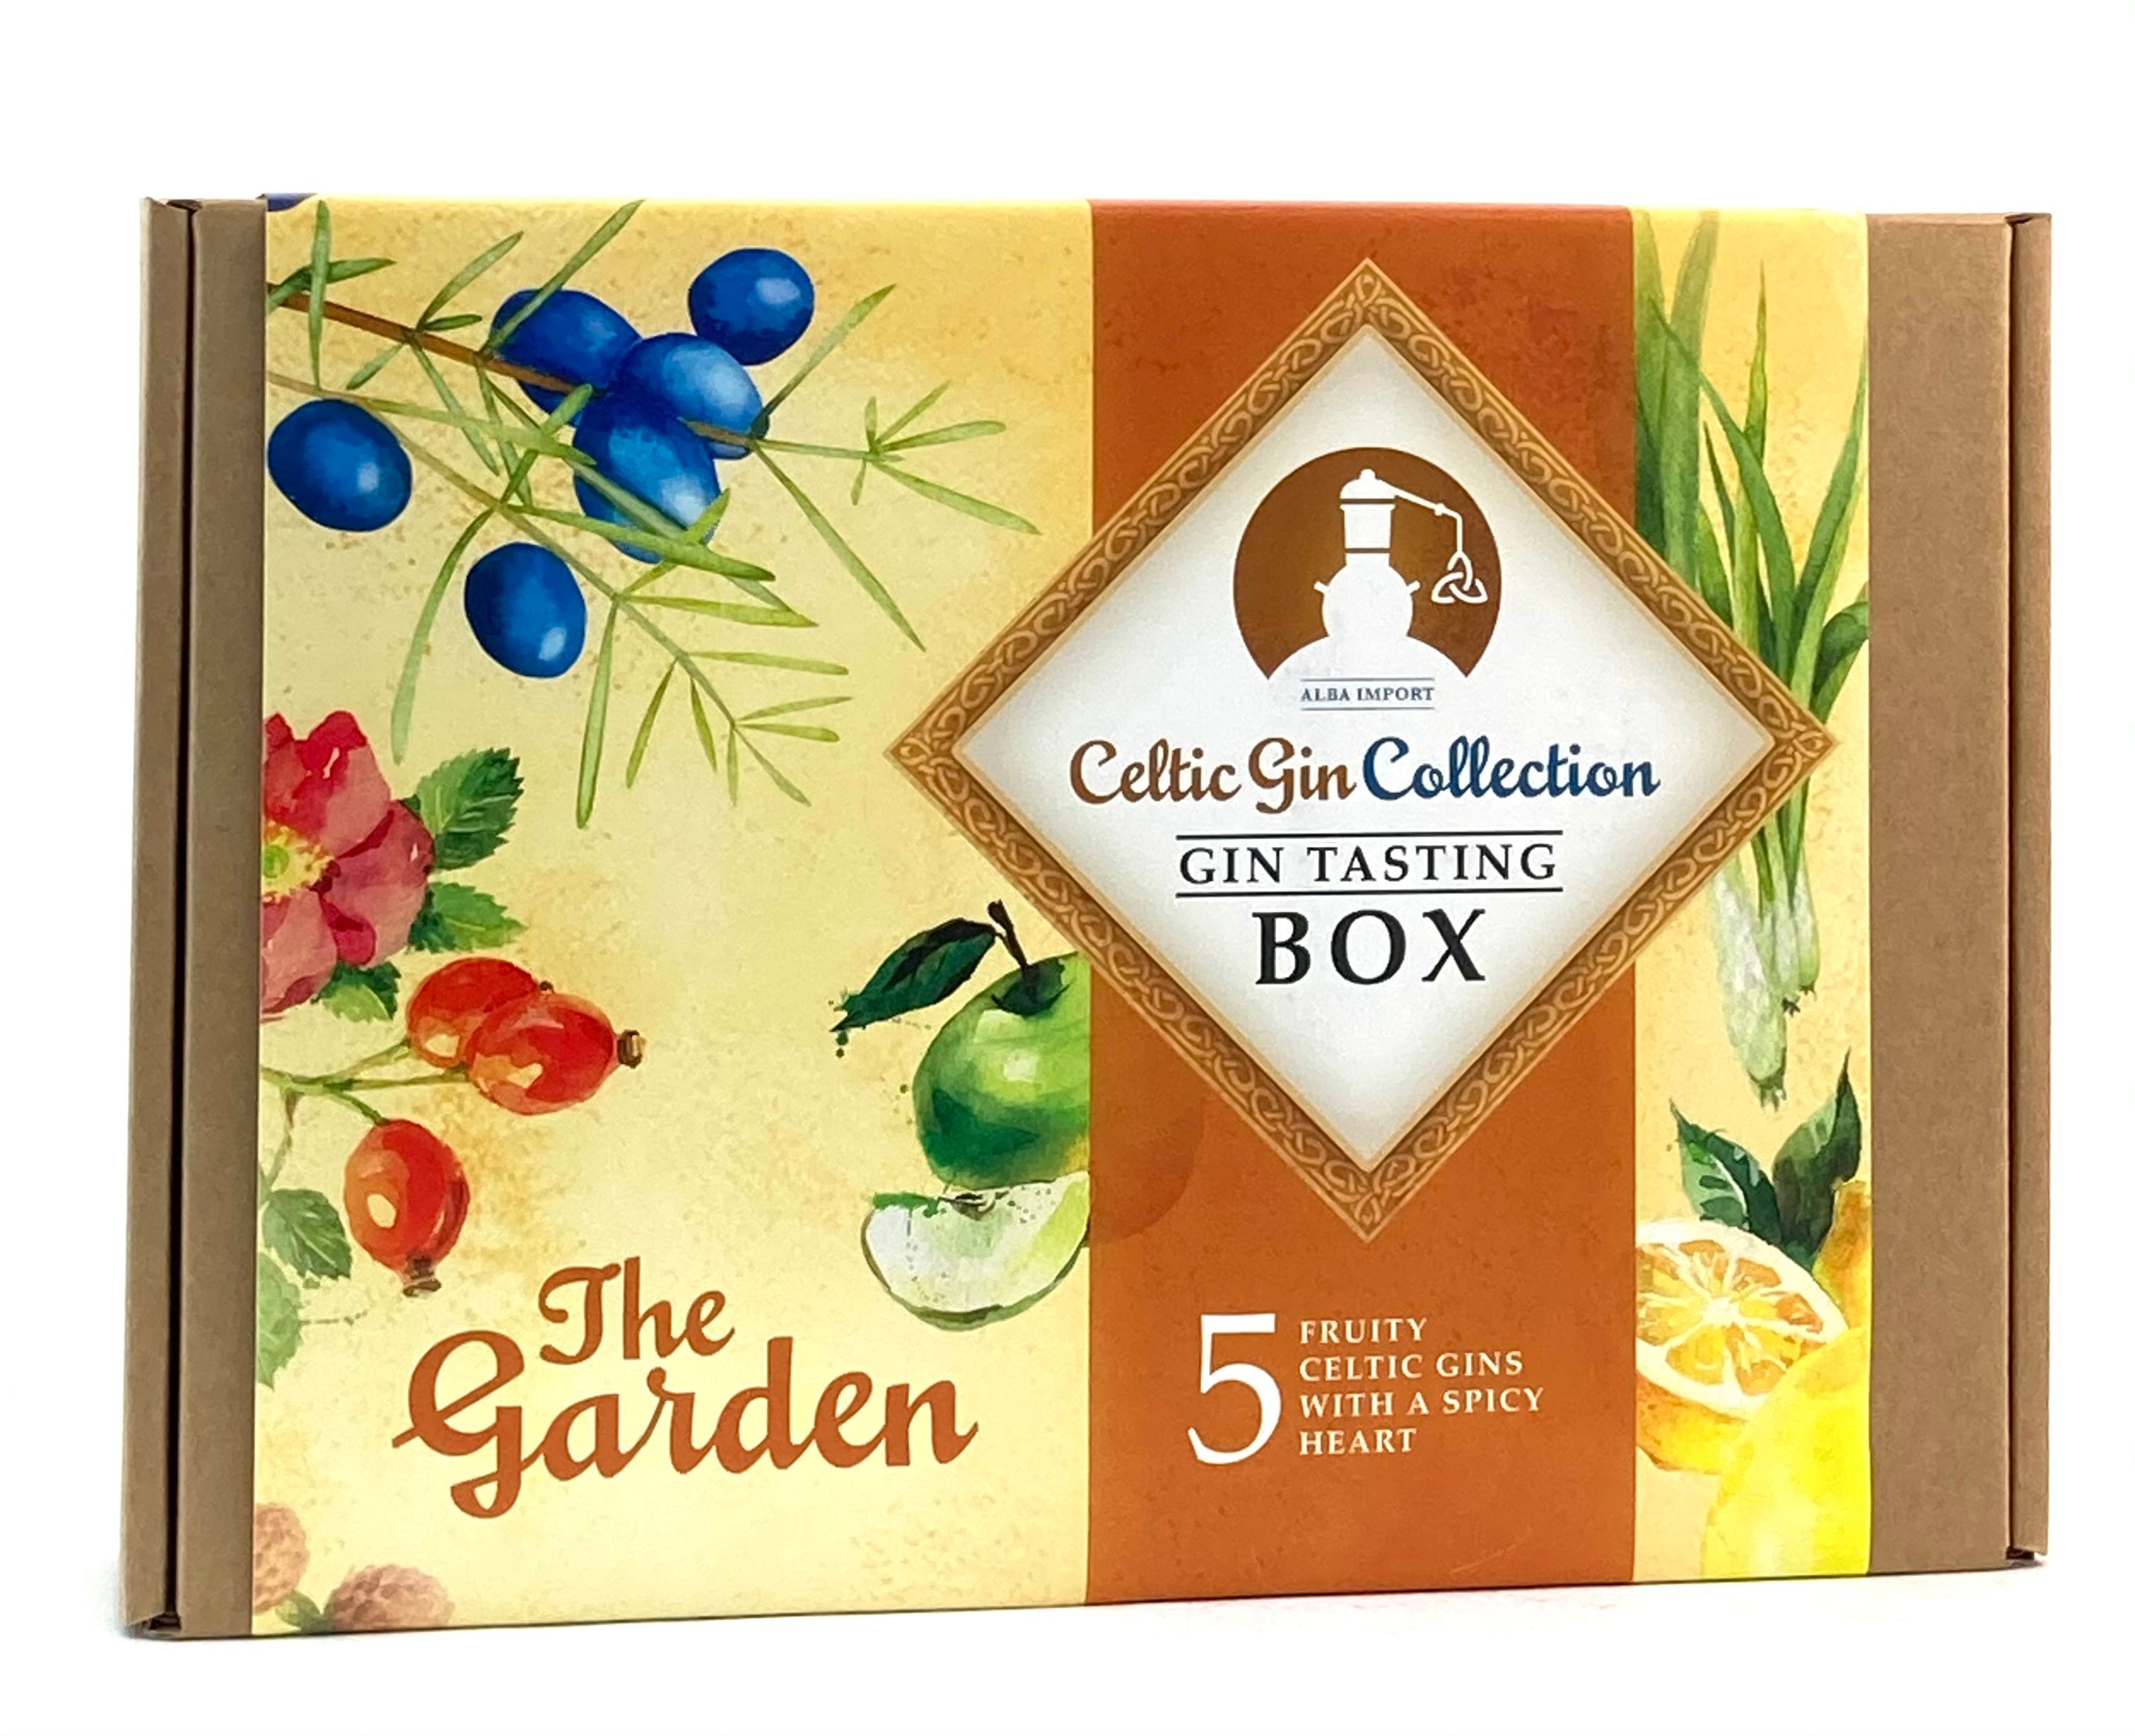 Celtic Gin Collection Tasting Box "The Garden" 5x0.04l 